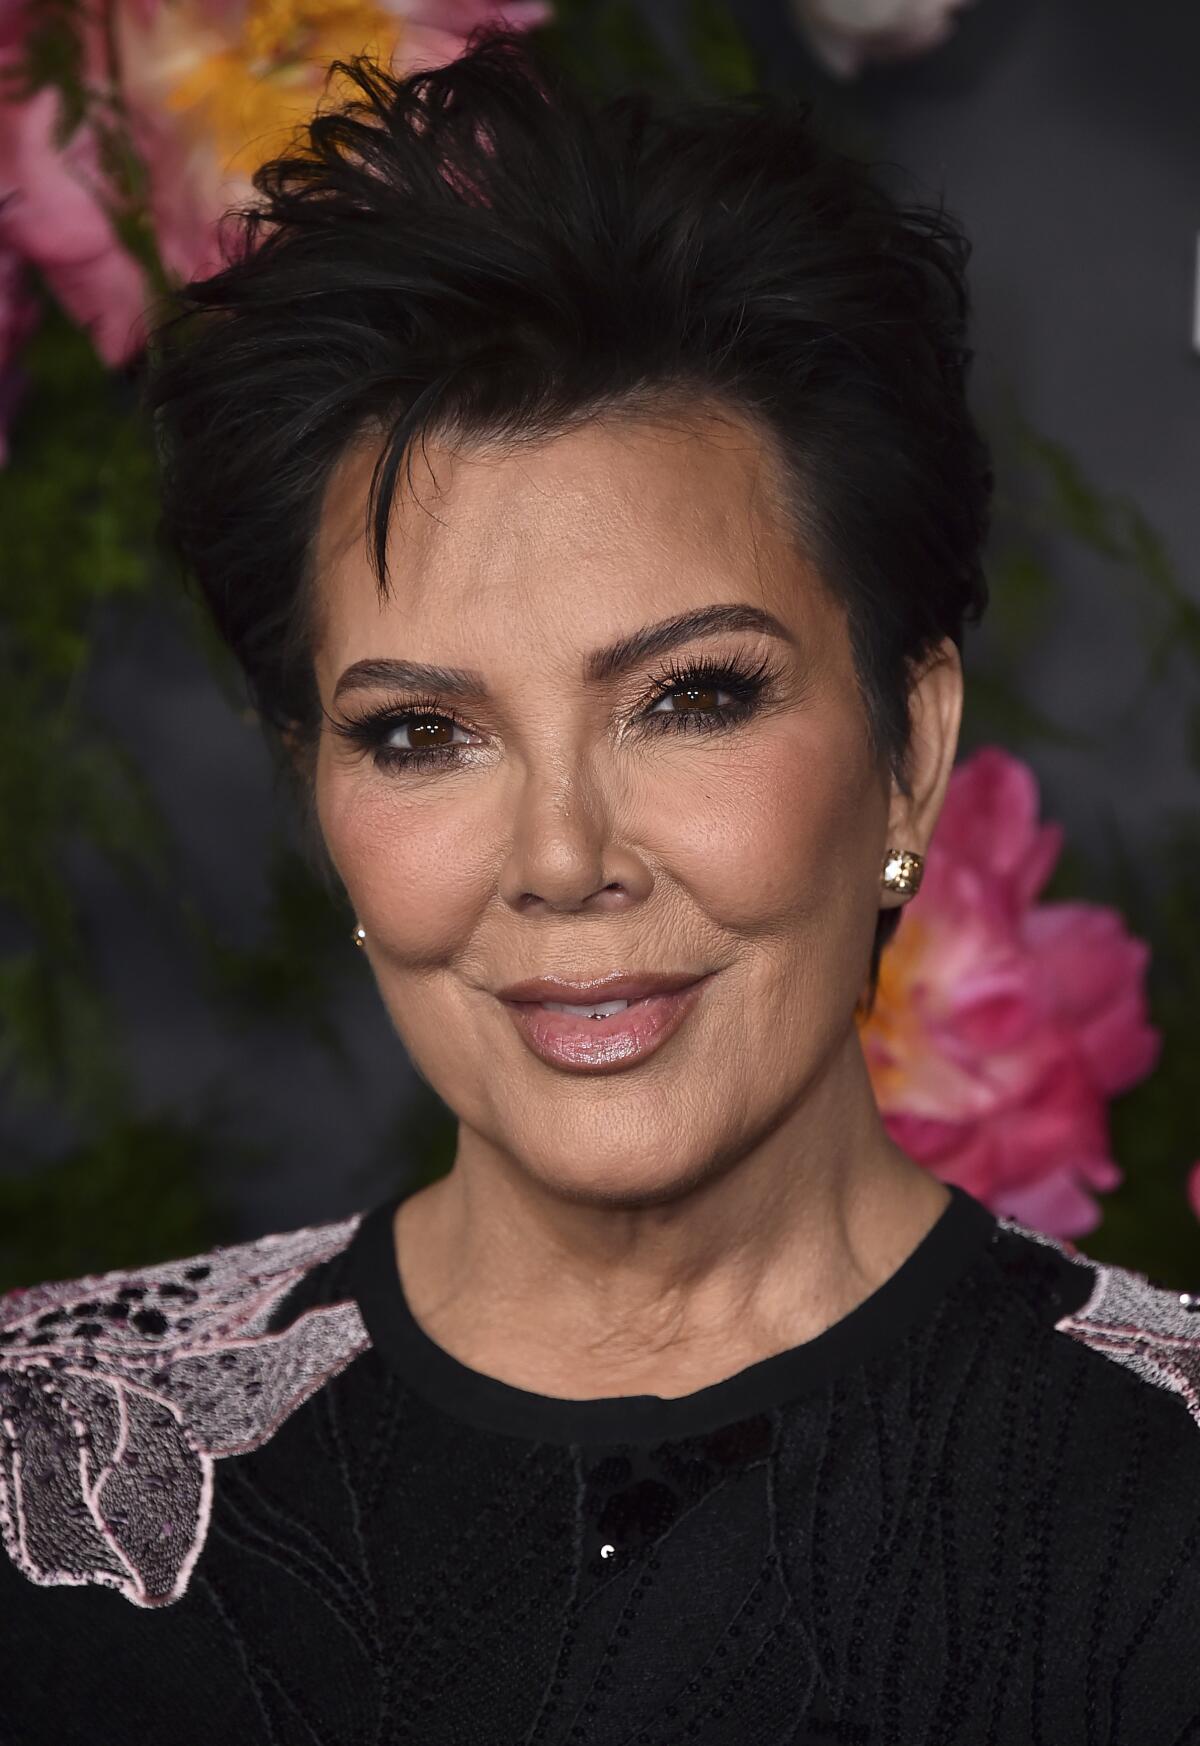 Kris Jenner smiles while wearing a black dress with white floral embroidery 